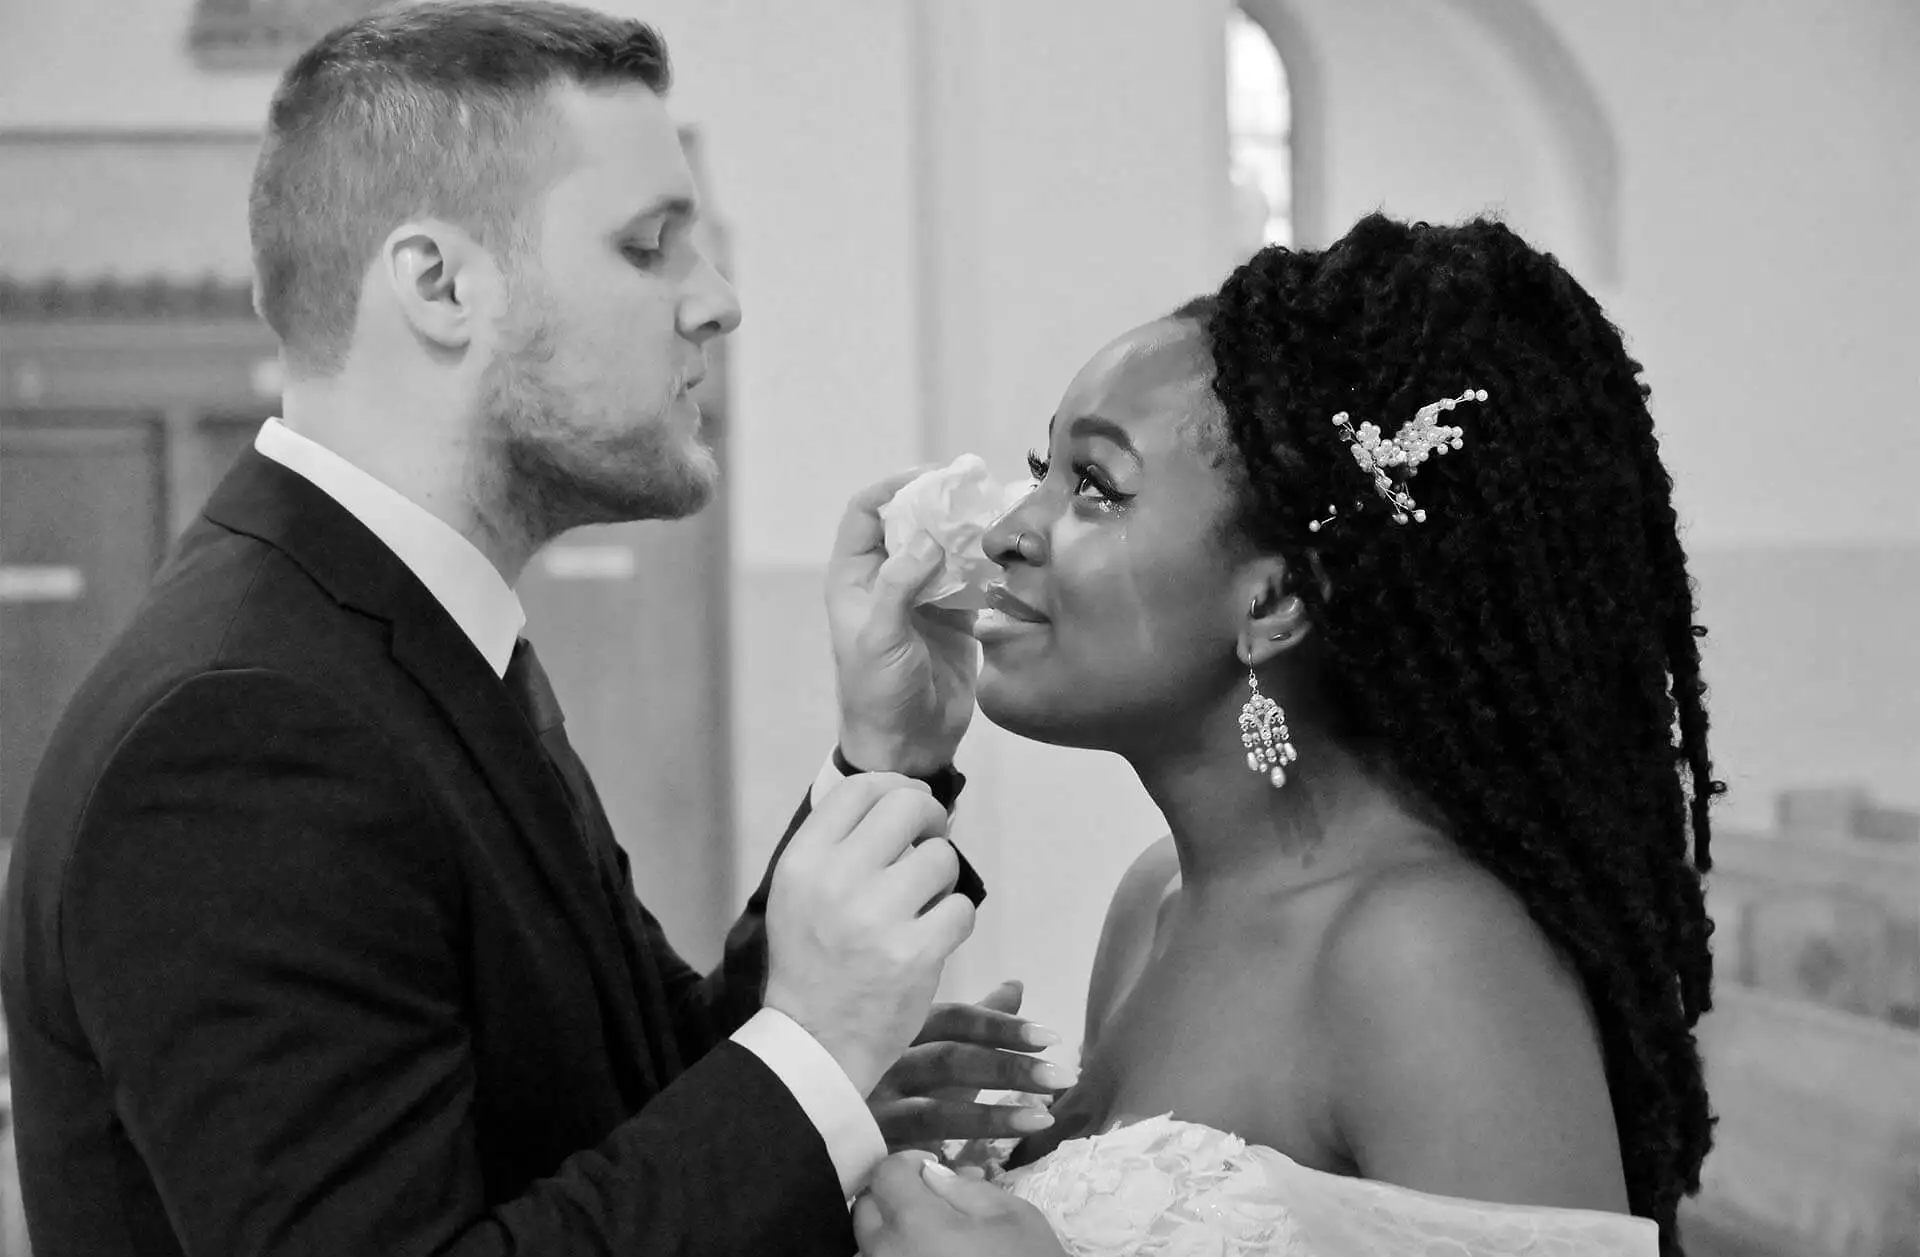 The groom dries the bride's eyes after an emotional First Look at her church in Troy, Michigan.